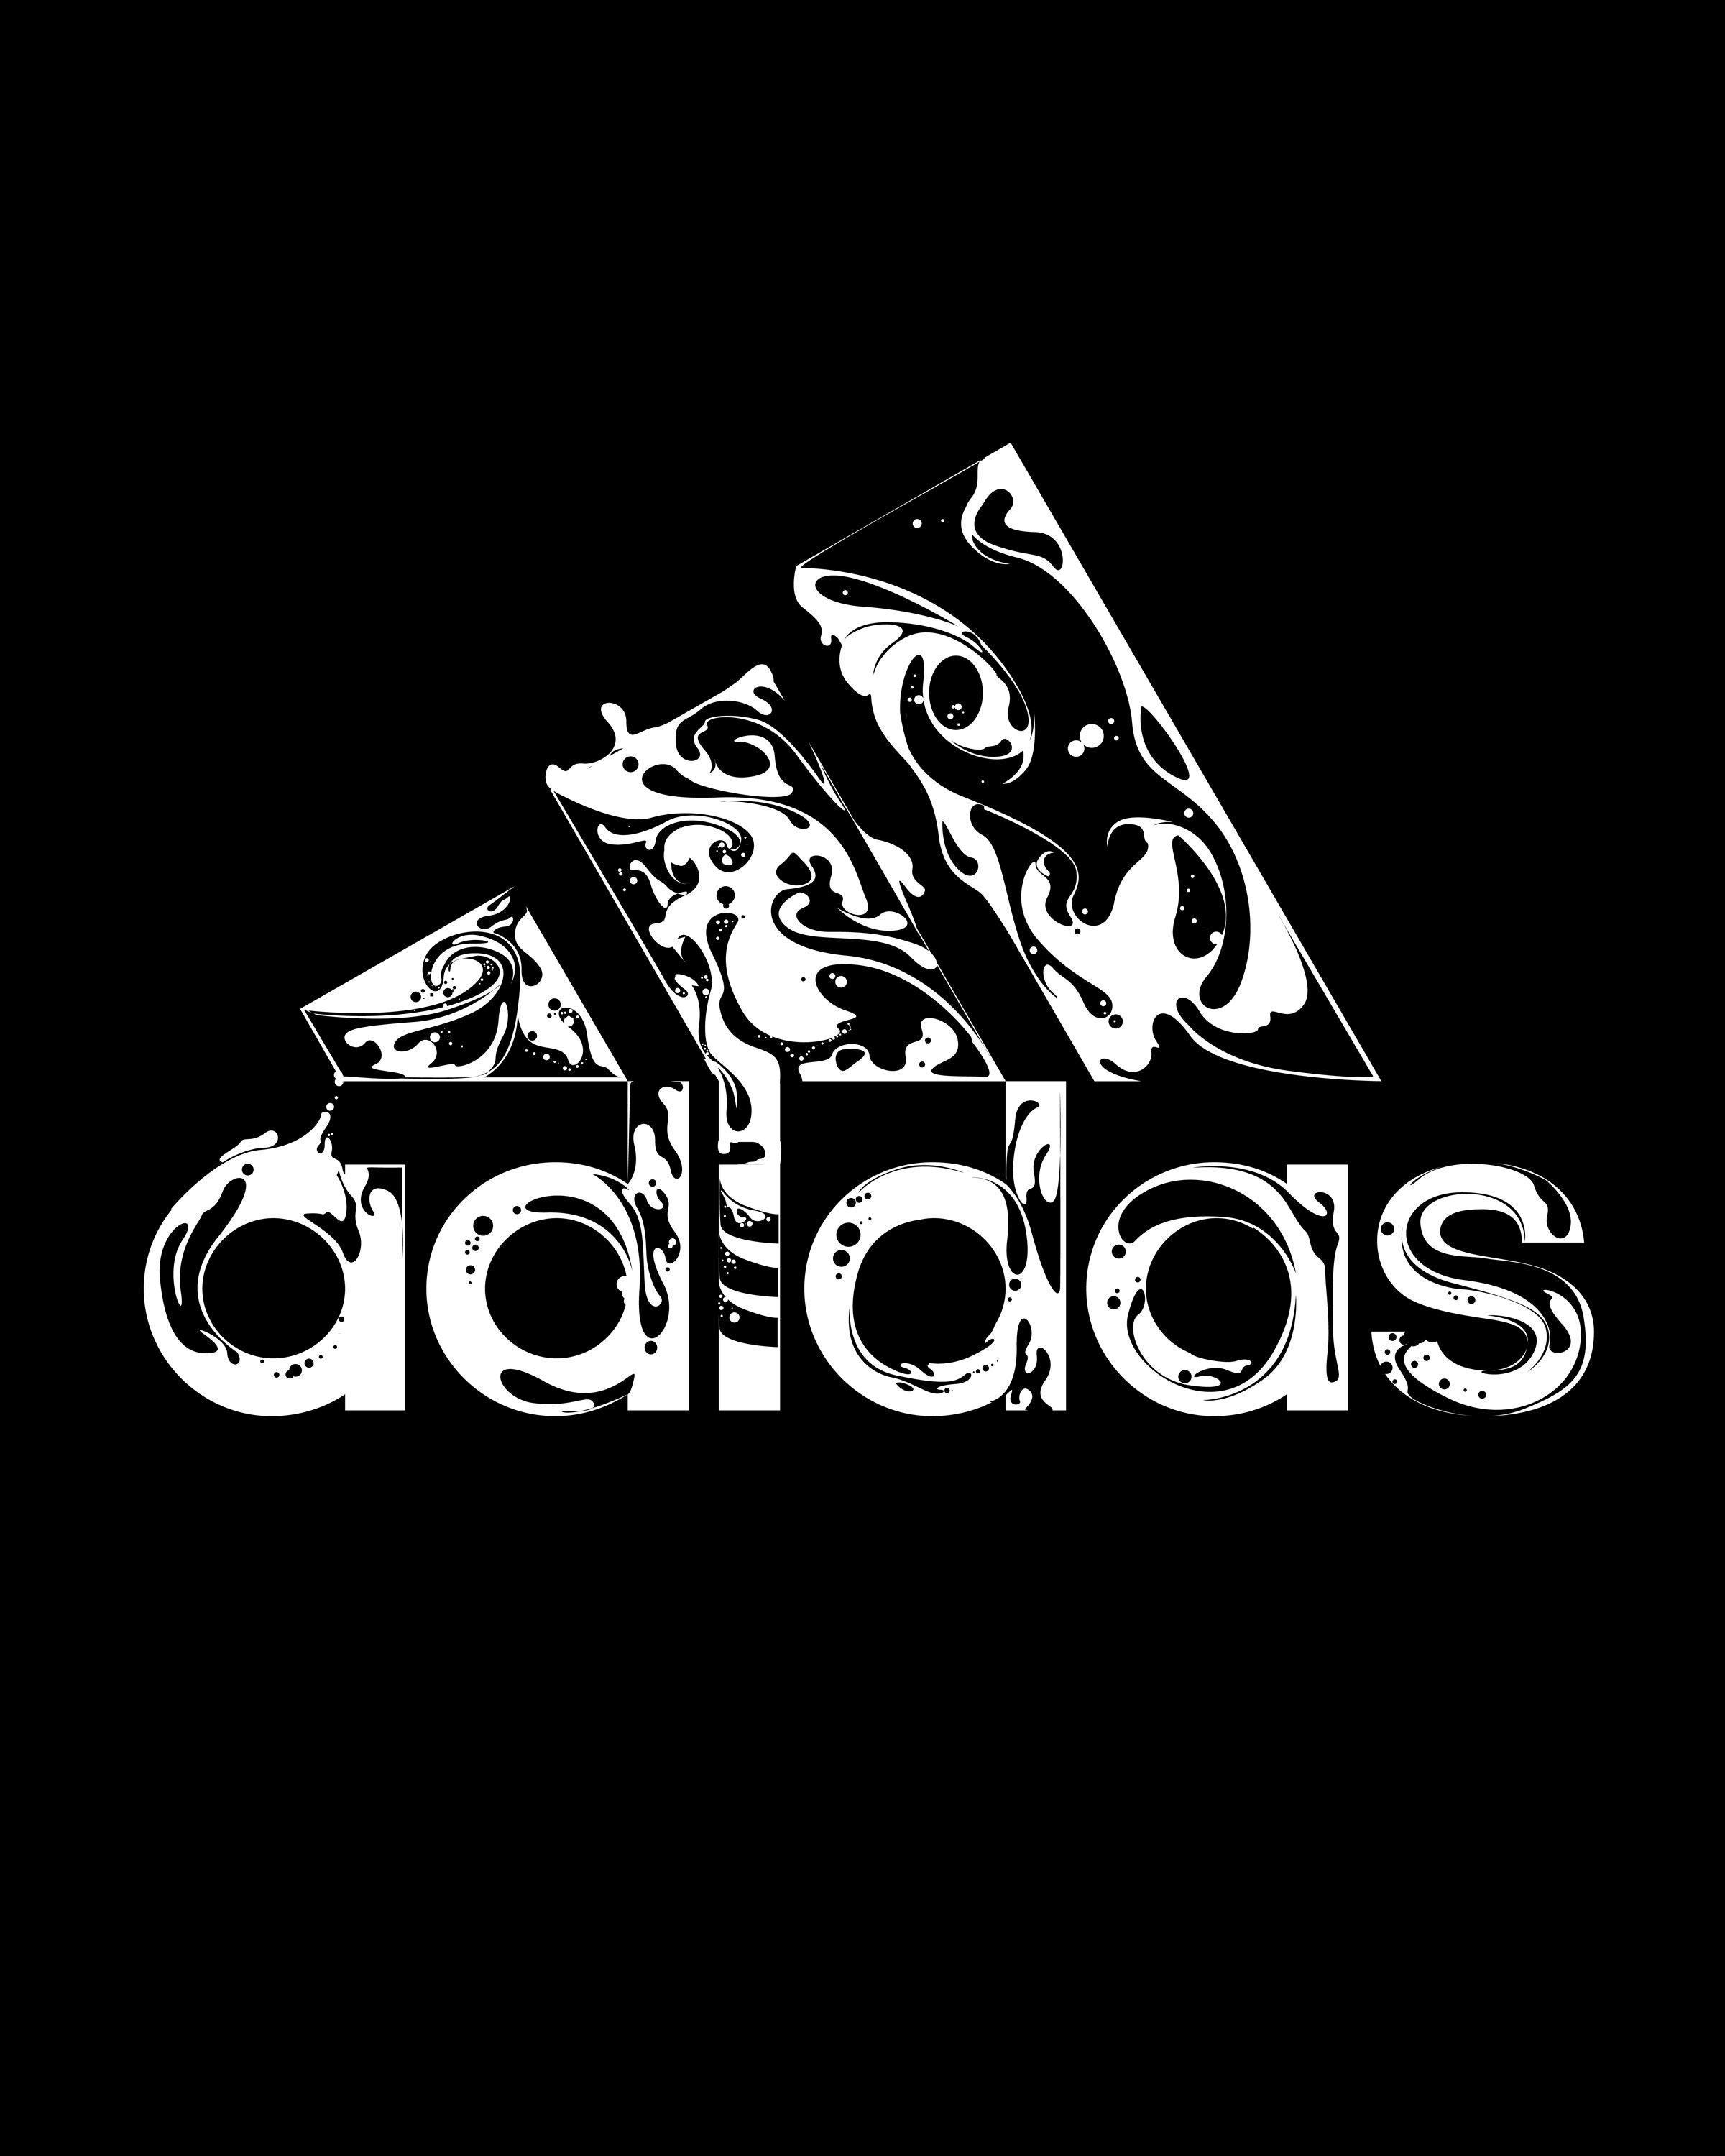 cool pictures of adidas